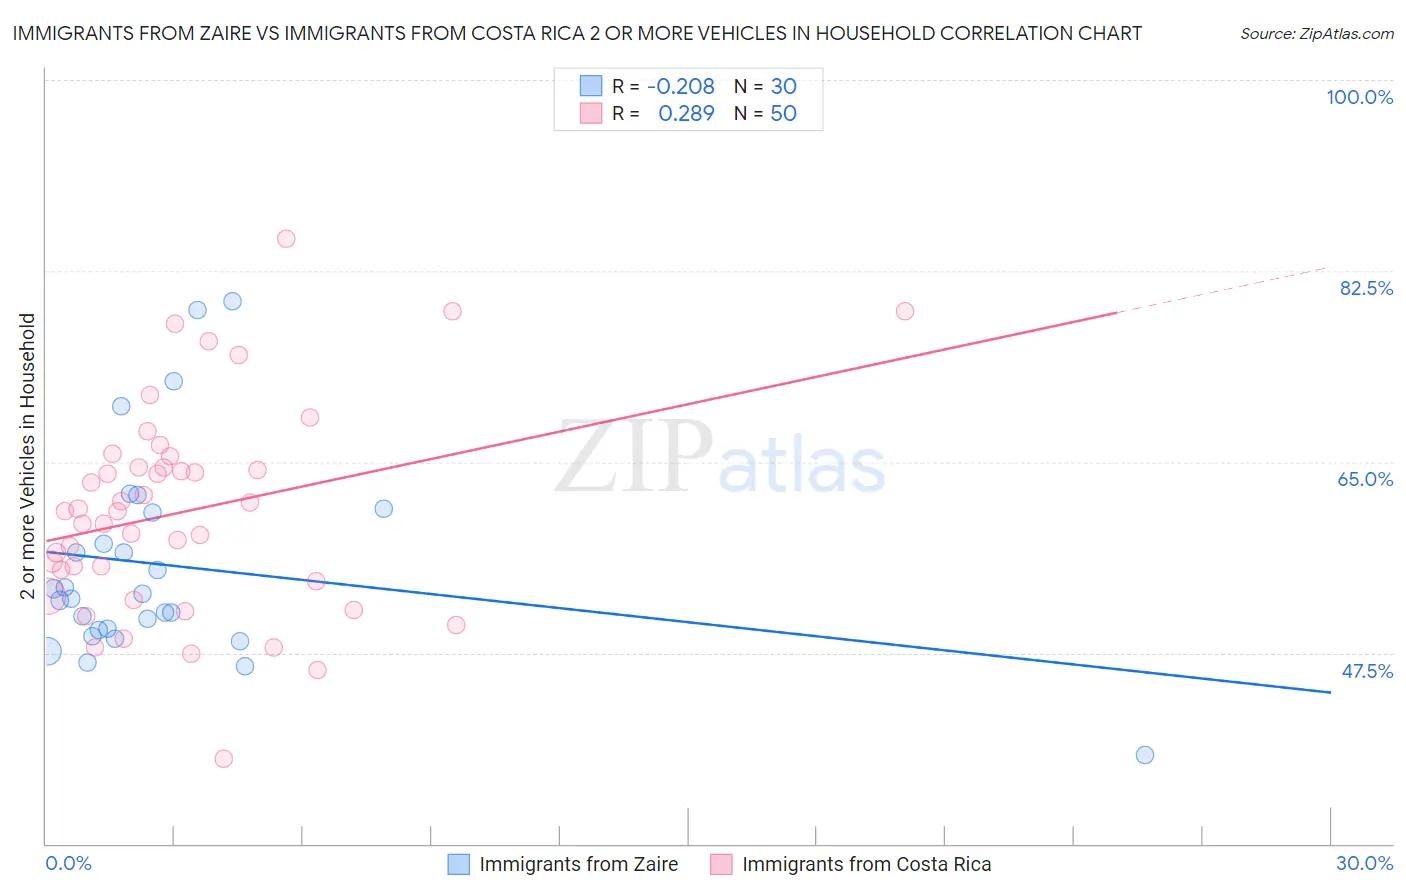 Immigrants from Zaire vs Immigrants from Costa Rica 2 or more Vehicles in Household